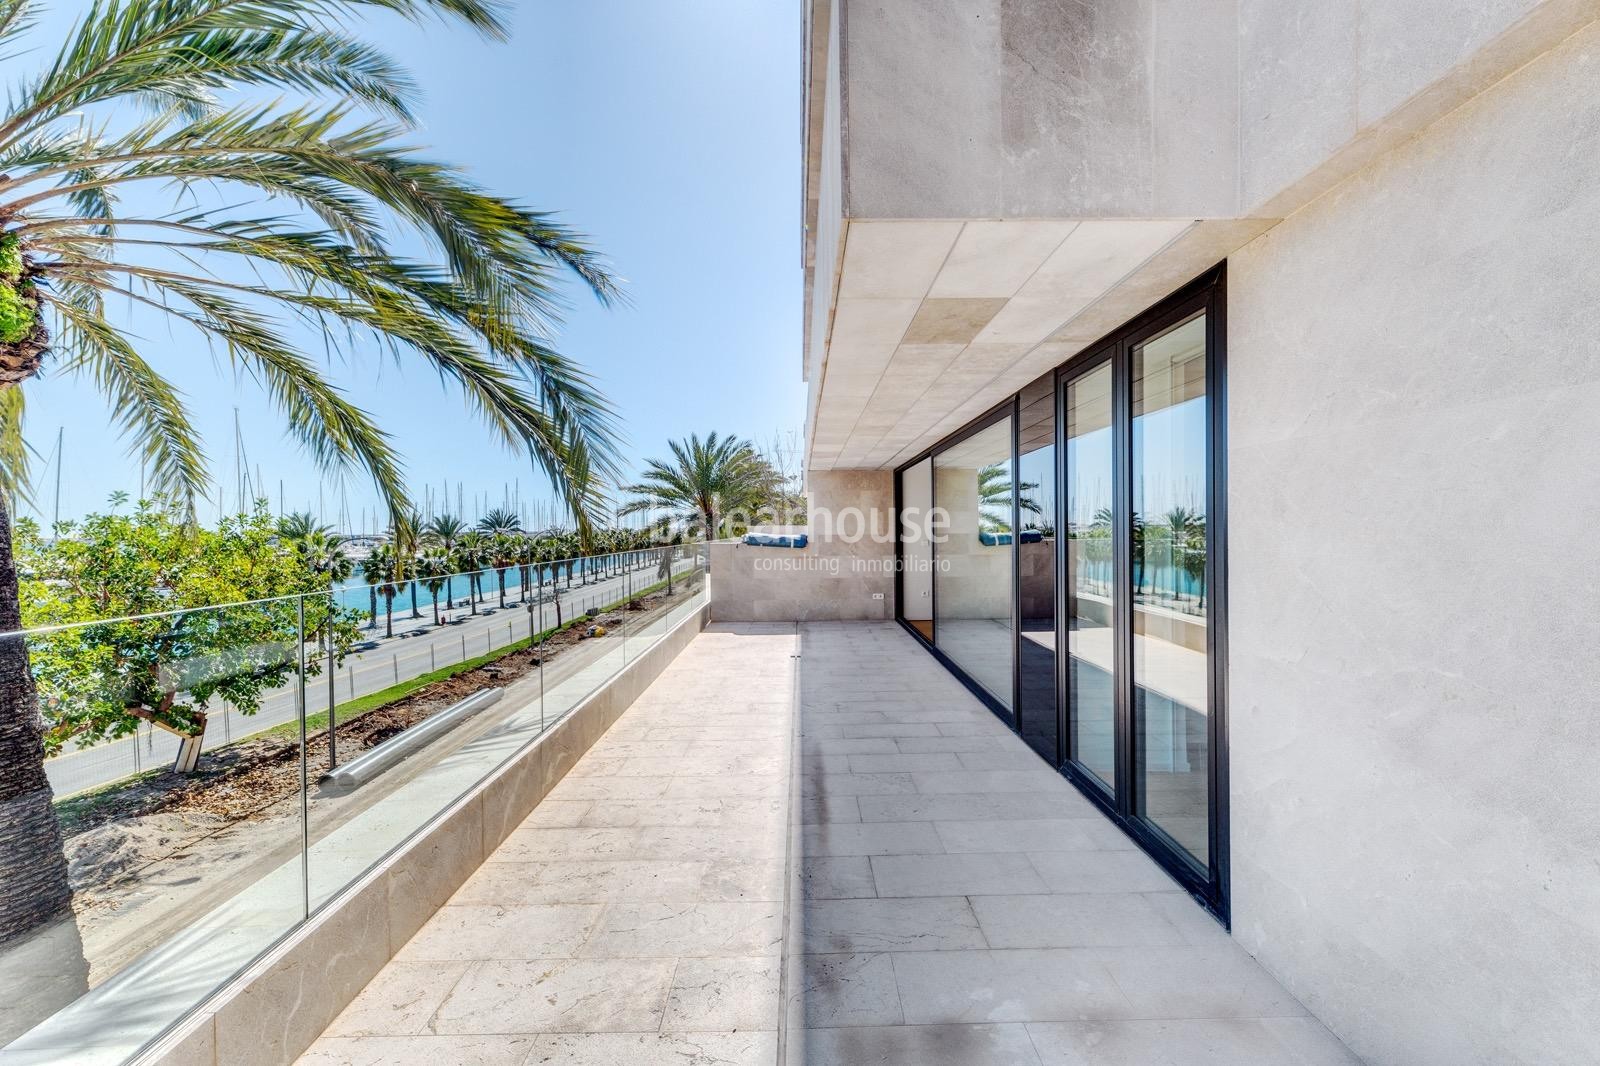 Exclusive new flats on the seafront of Palma where you can live the most contemporary luxury.